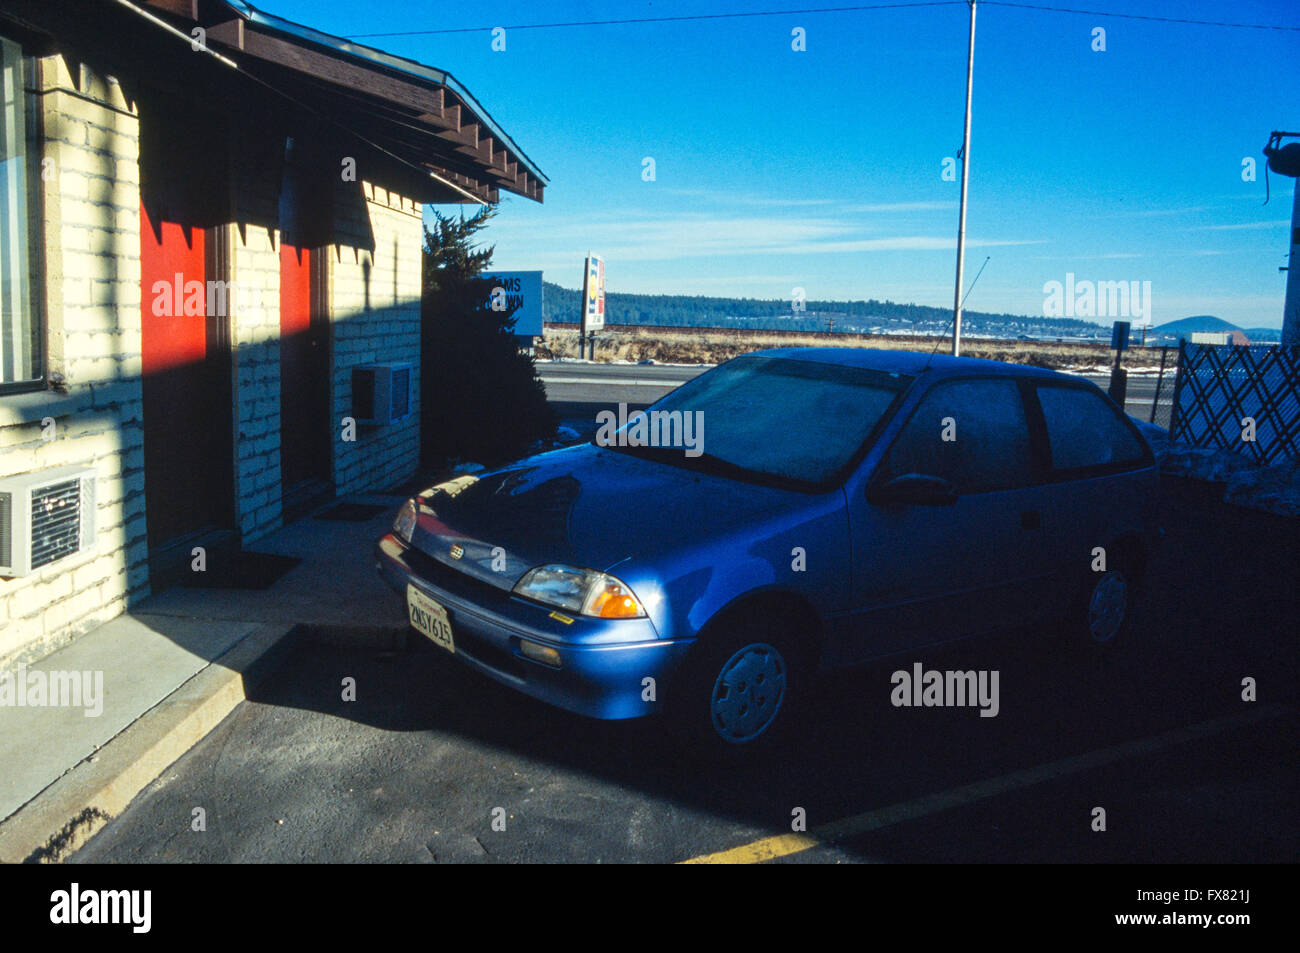 Archive image of a metallic blue 1990 model Geo Metro 3-door subcompact hatchback car outside a motel in Williams, Arizona, USA, 1990 Stock Photo